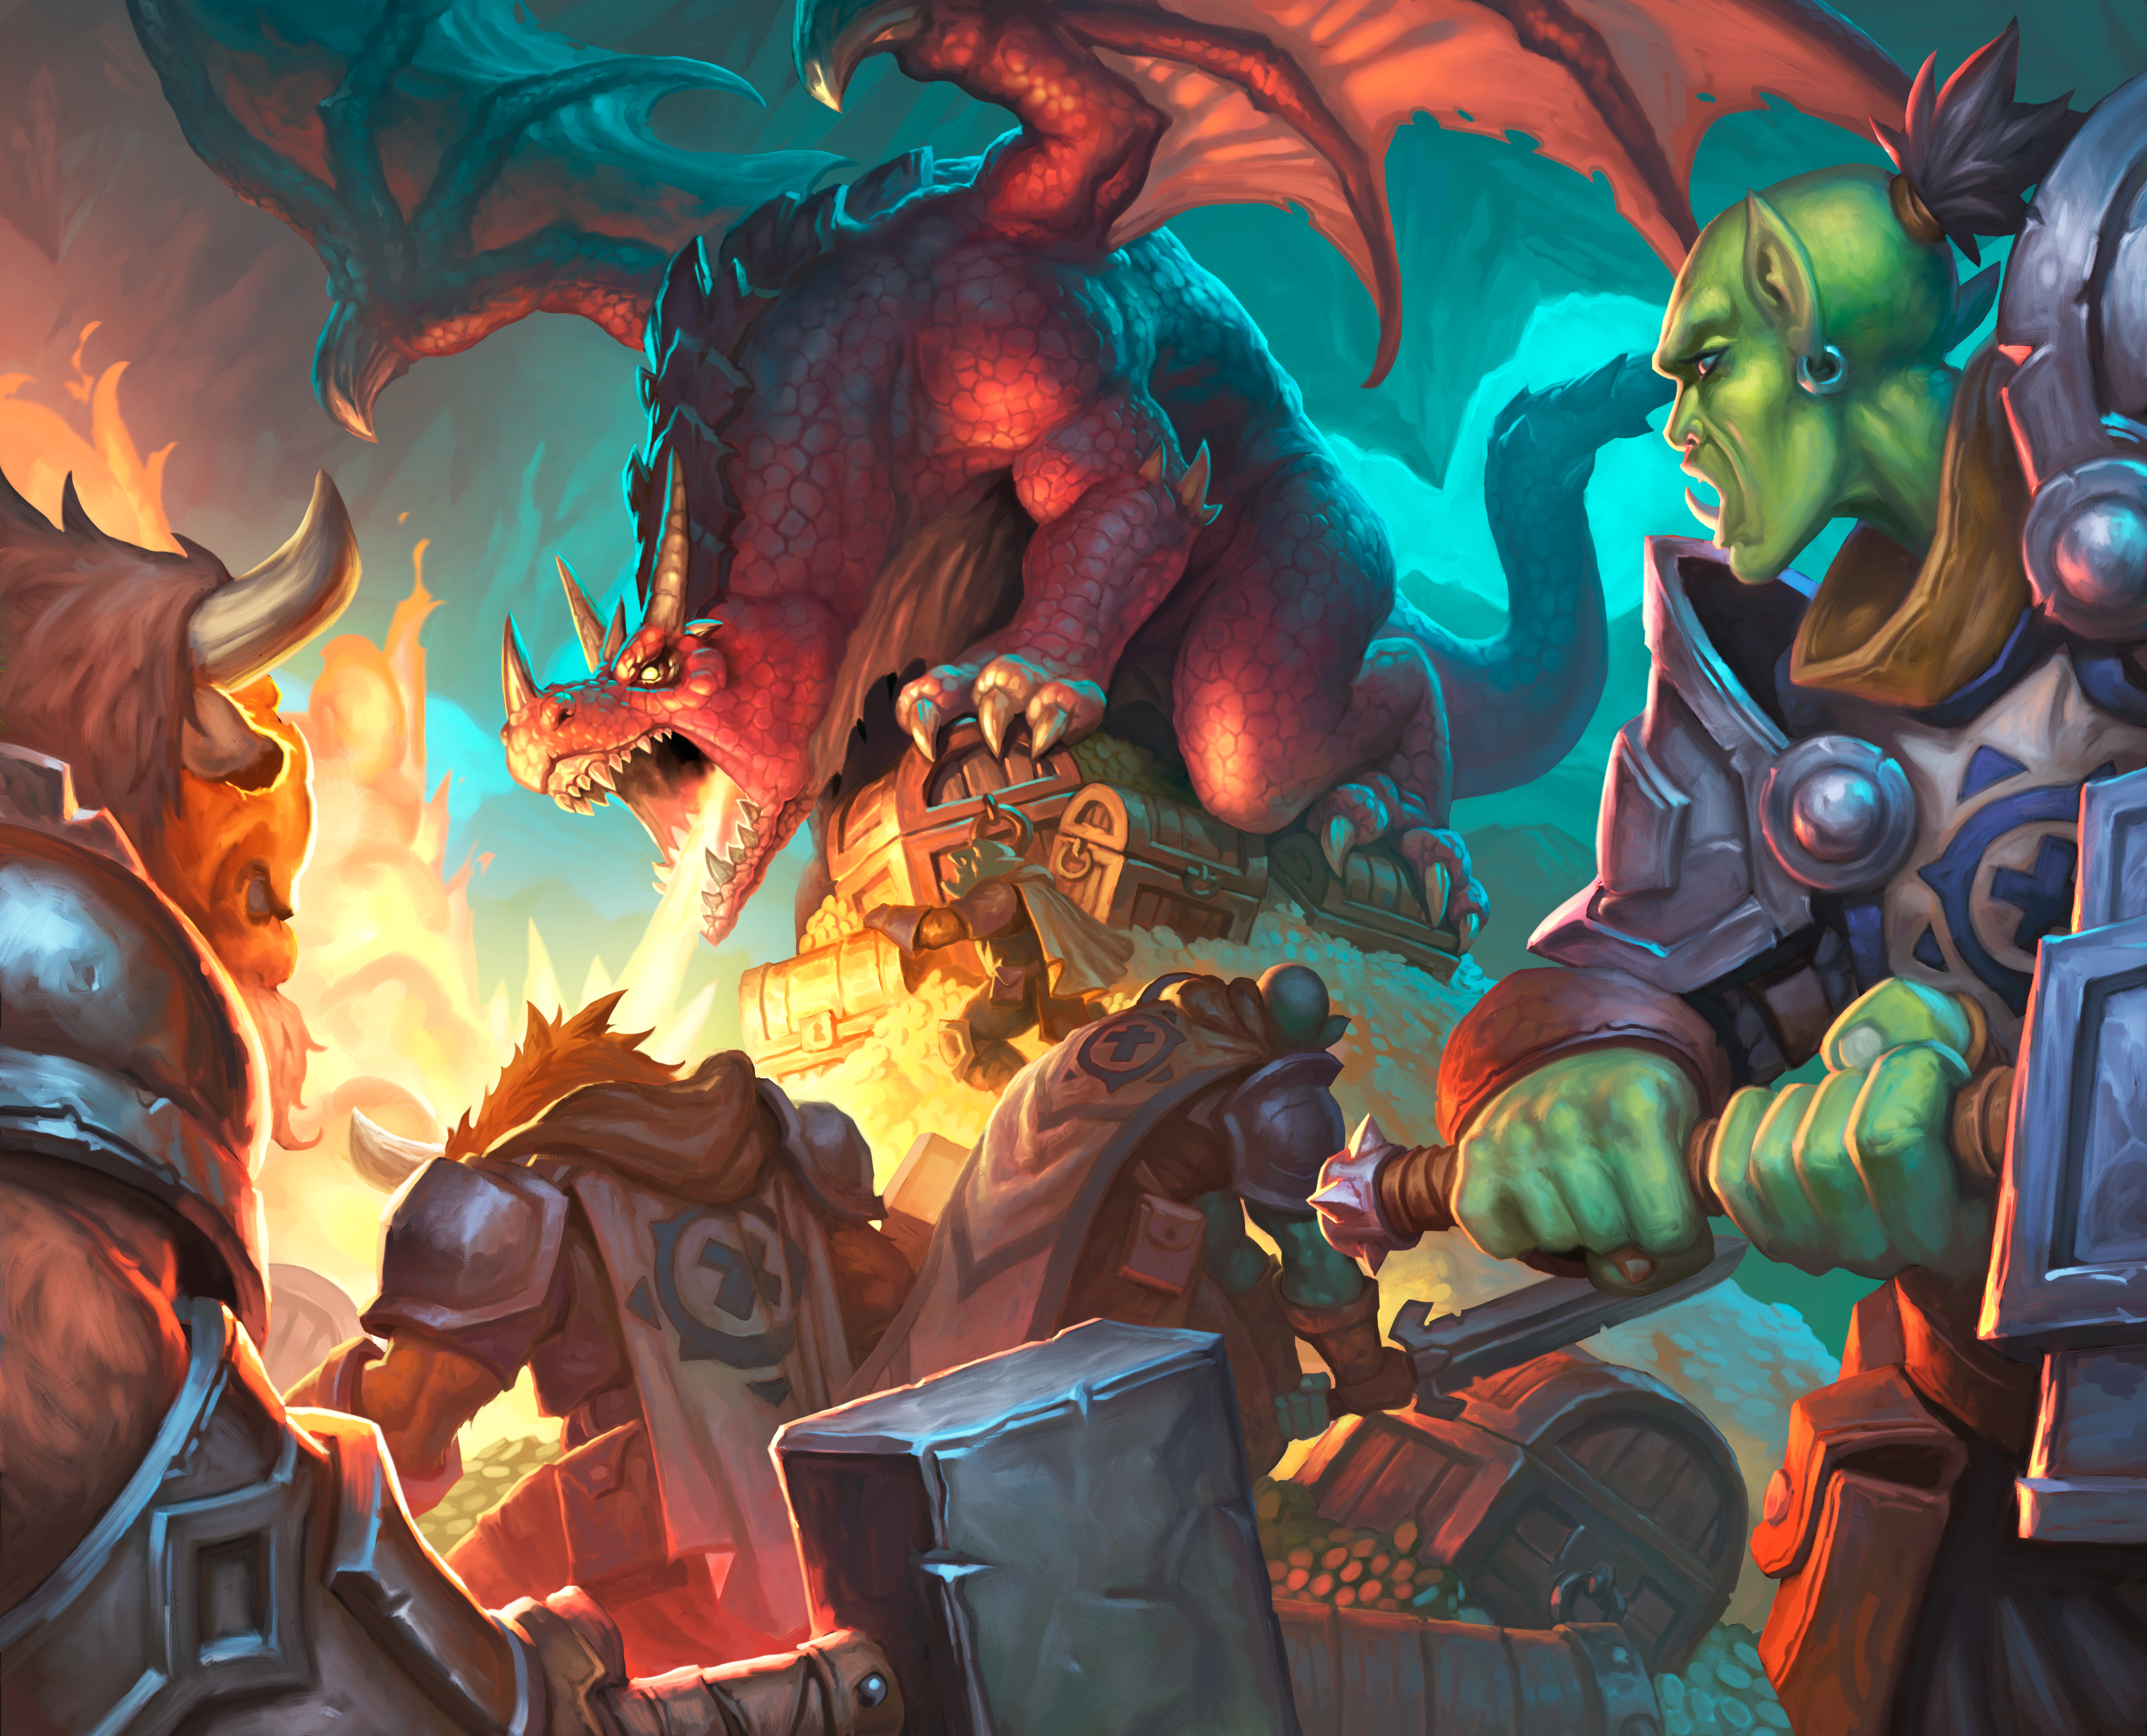 Hearthstone Heroes Of Warcraft Hearthstone Kobolds And Catacombs PC Gaming Dragon Video Games 4385x3545